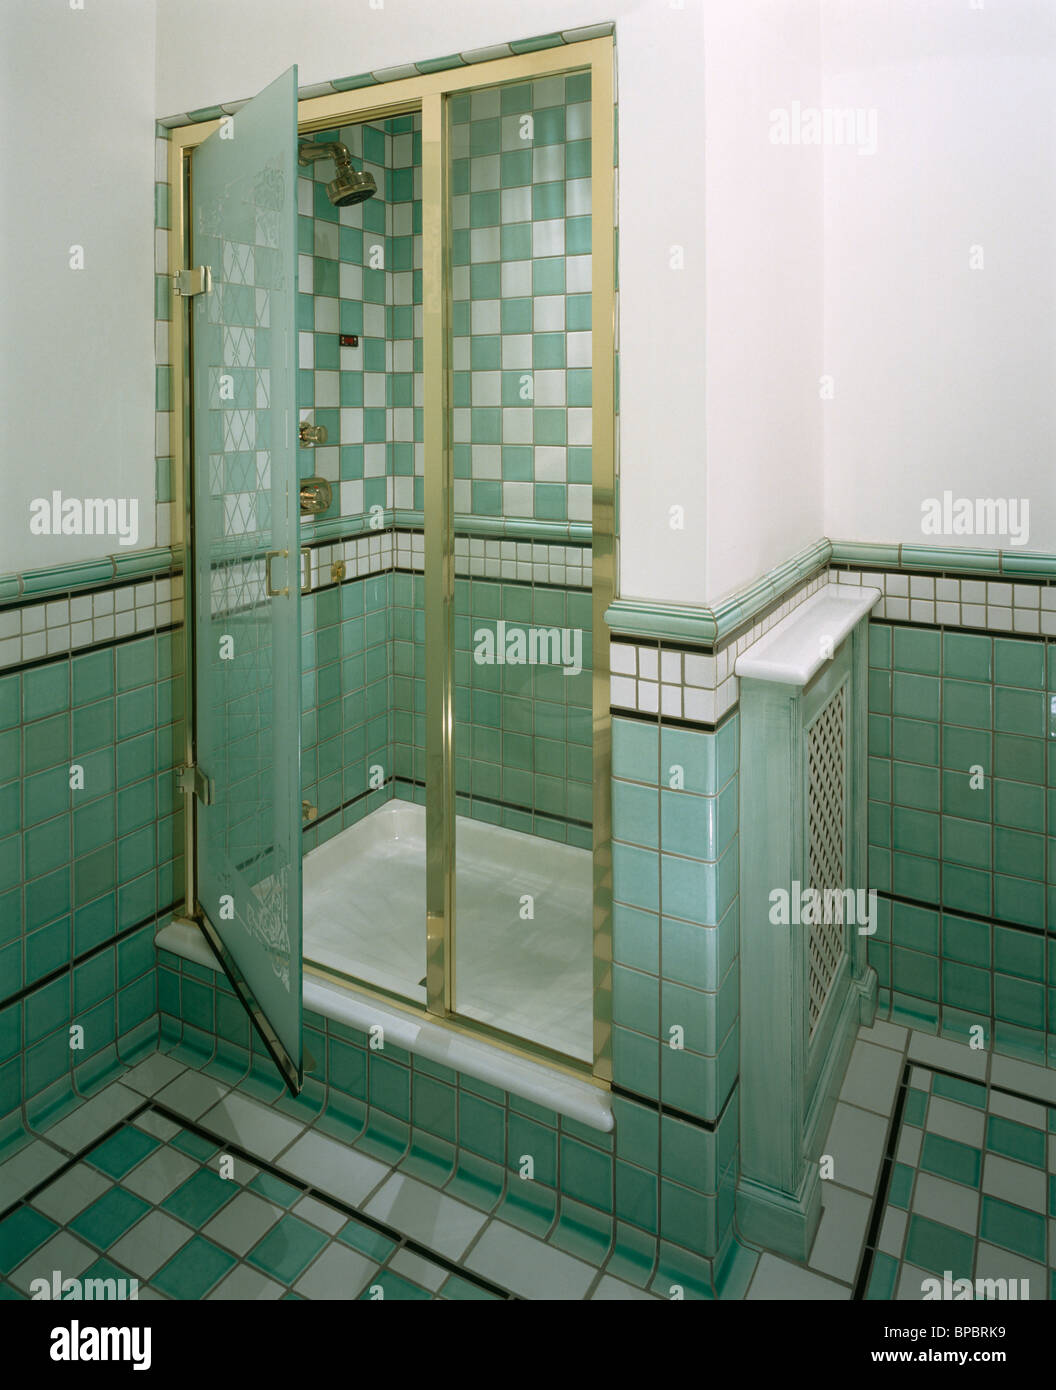 Glass Doors On Shower Cabinet With Green White Tiled Walls In White Bathroom With Green Wall Tiles Stock Photo Alamy